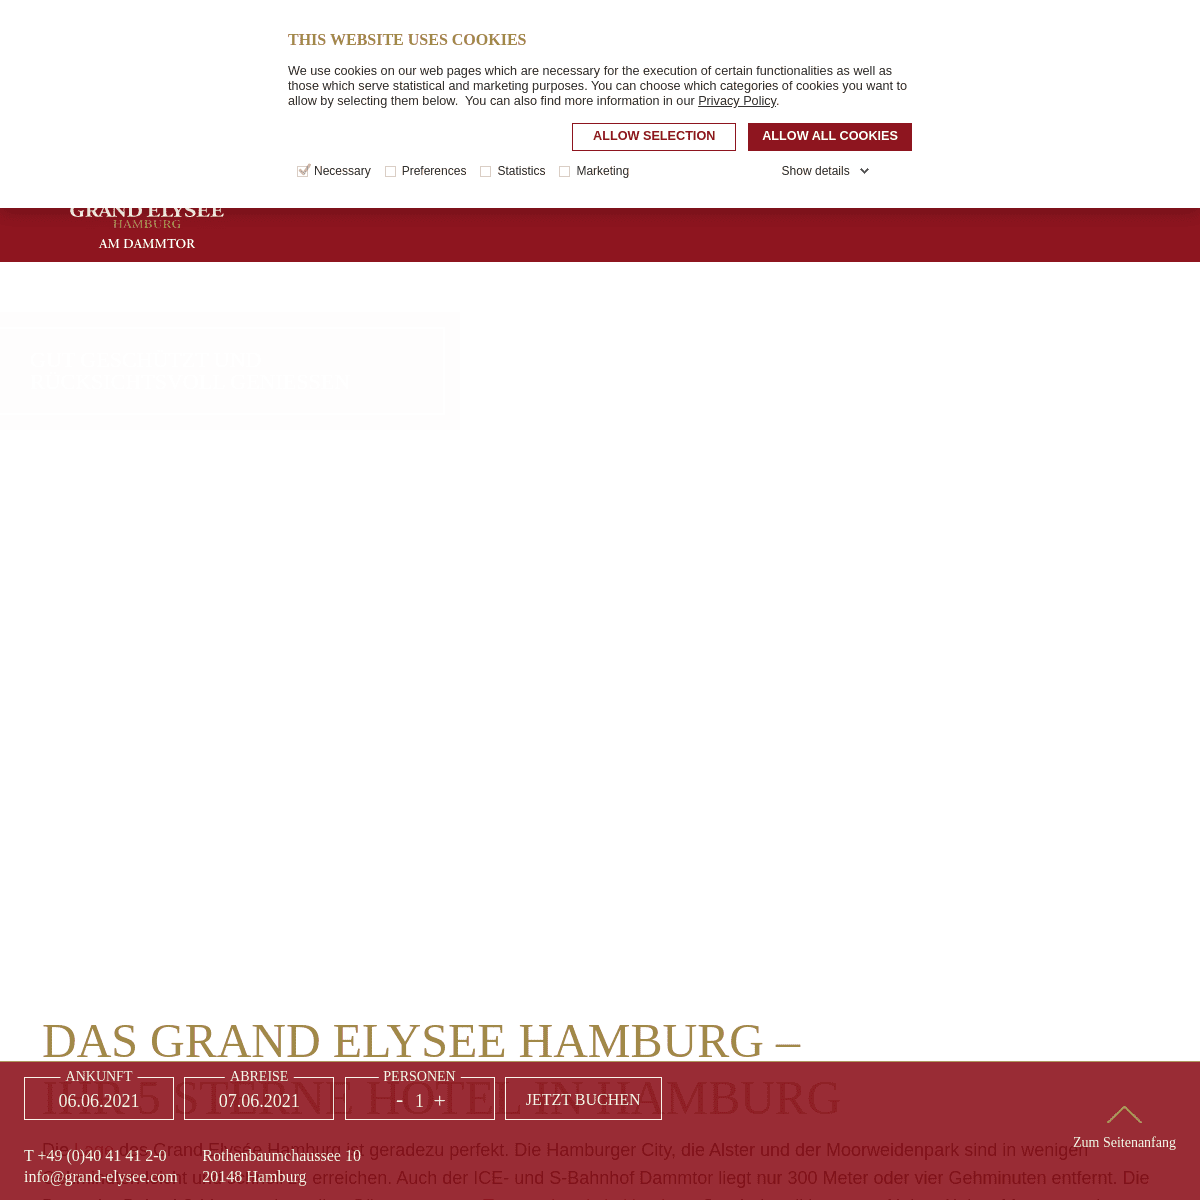 A complete backup of https://grand-elysee.com